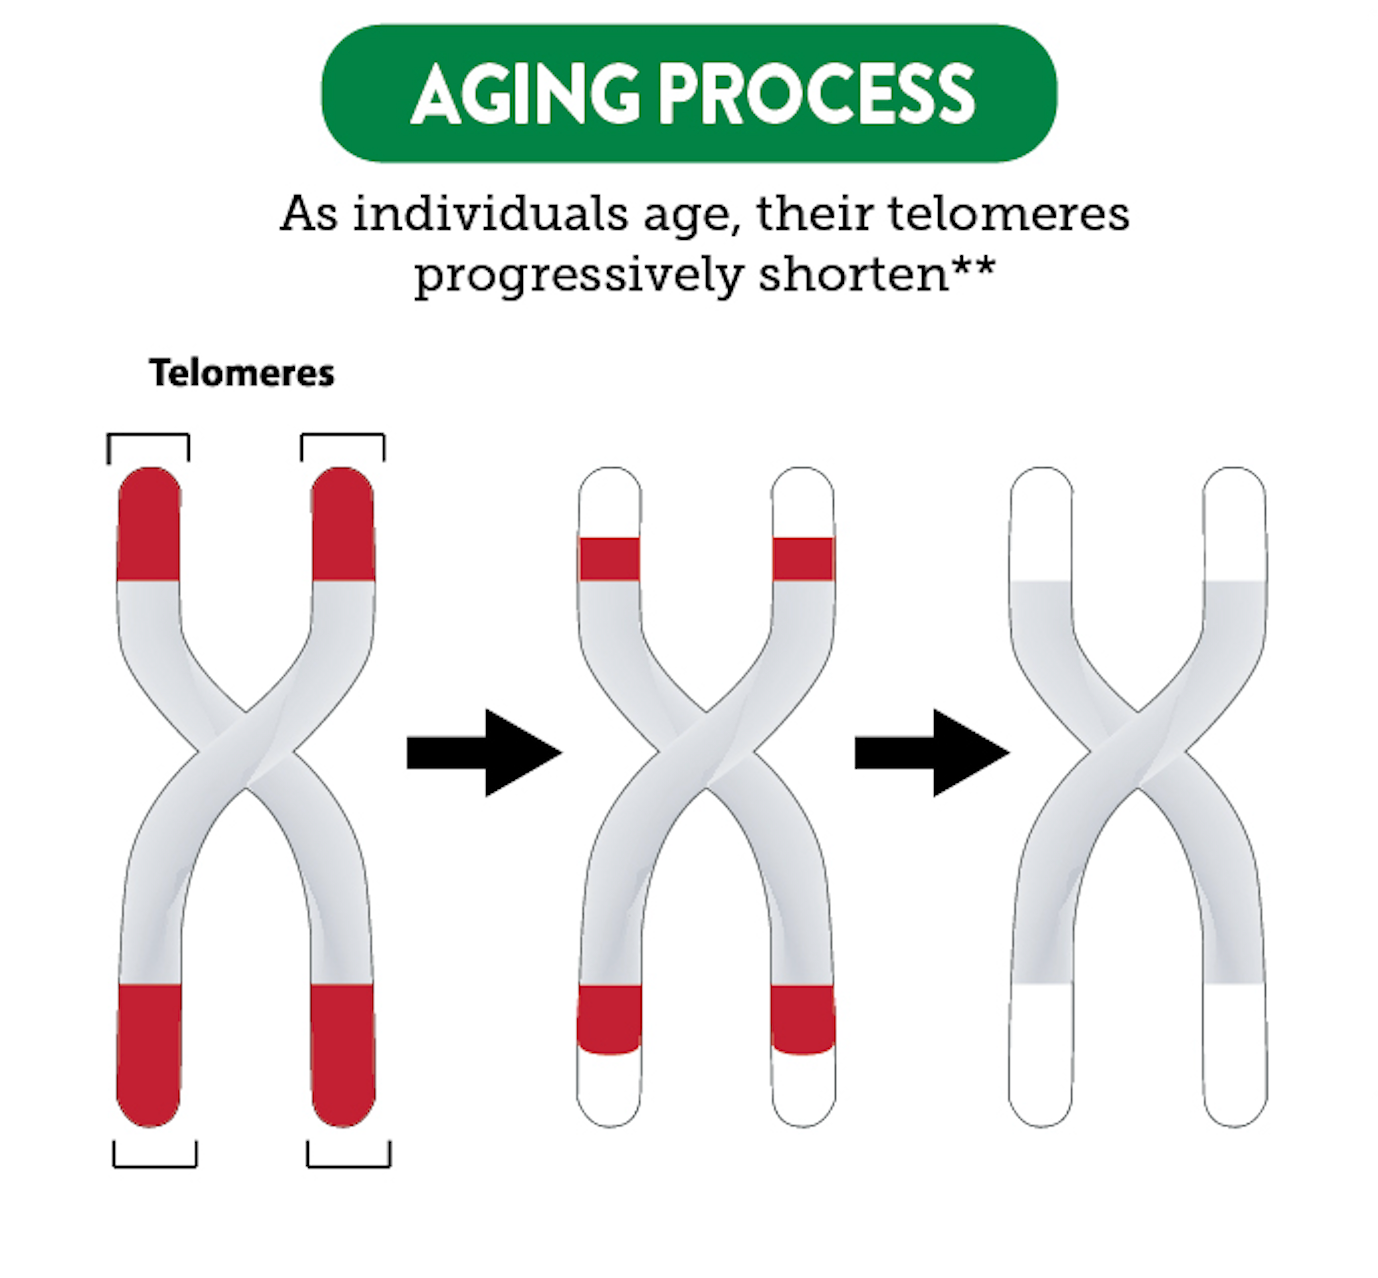 A diagram showing telomeres and the role they play in aging